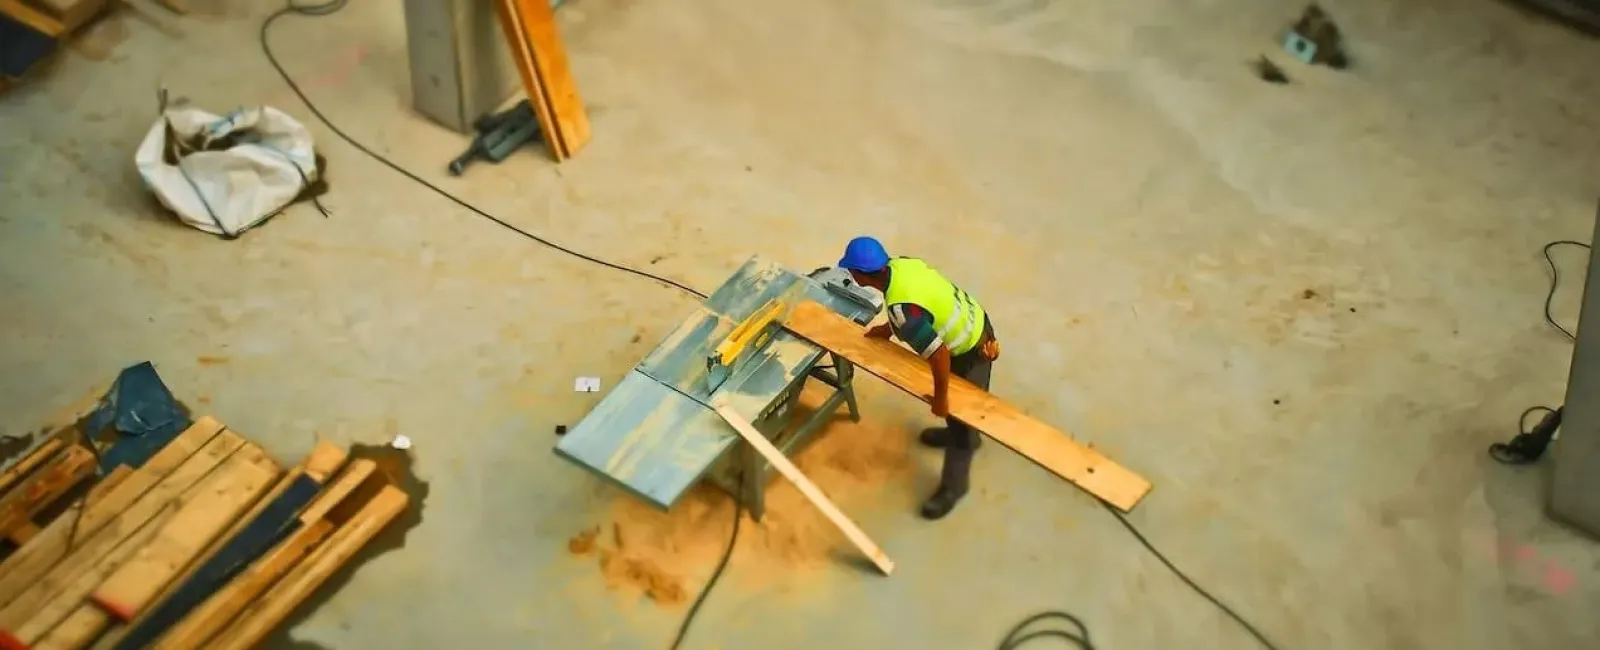 a person working on a construction project